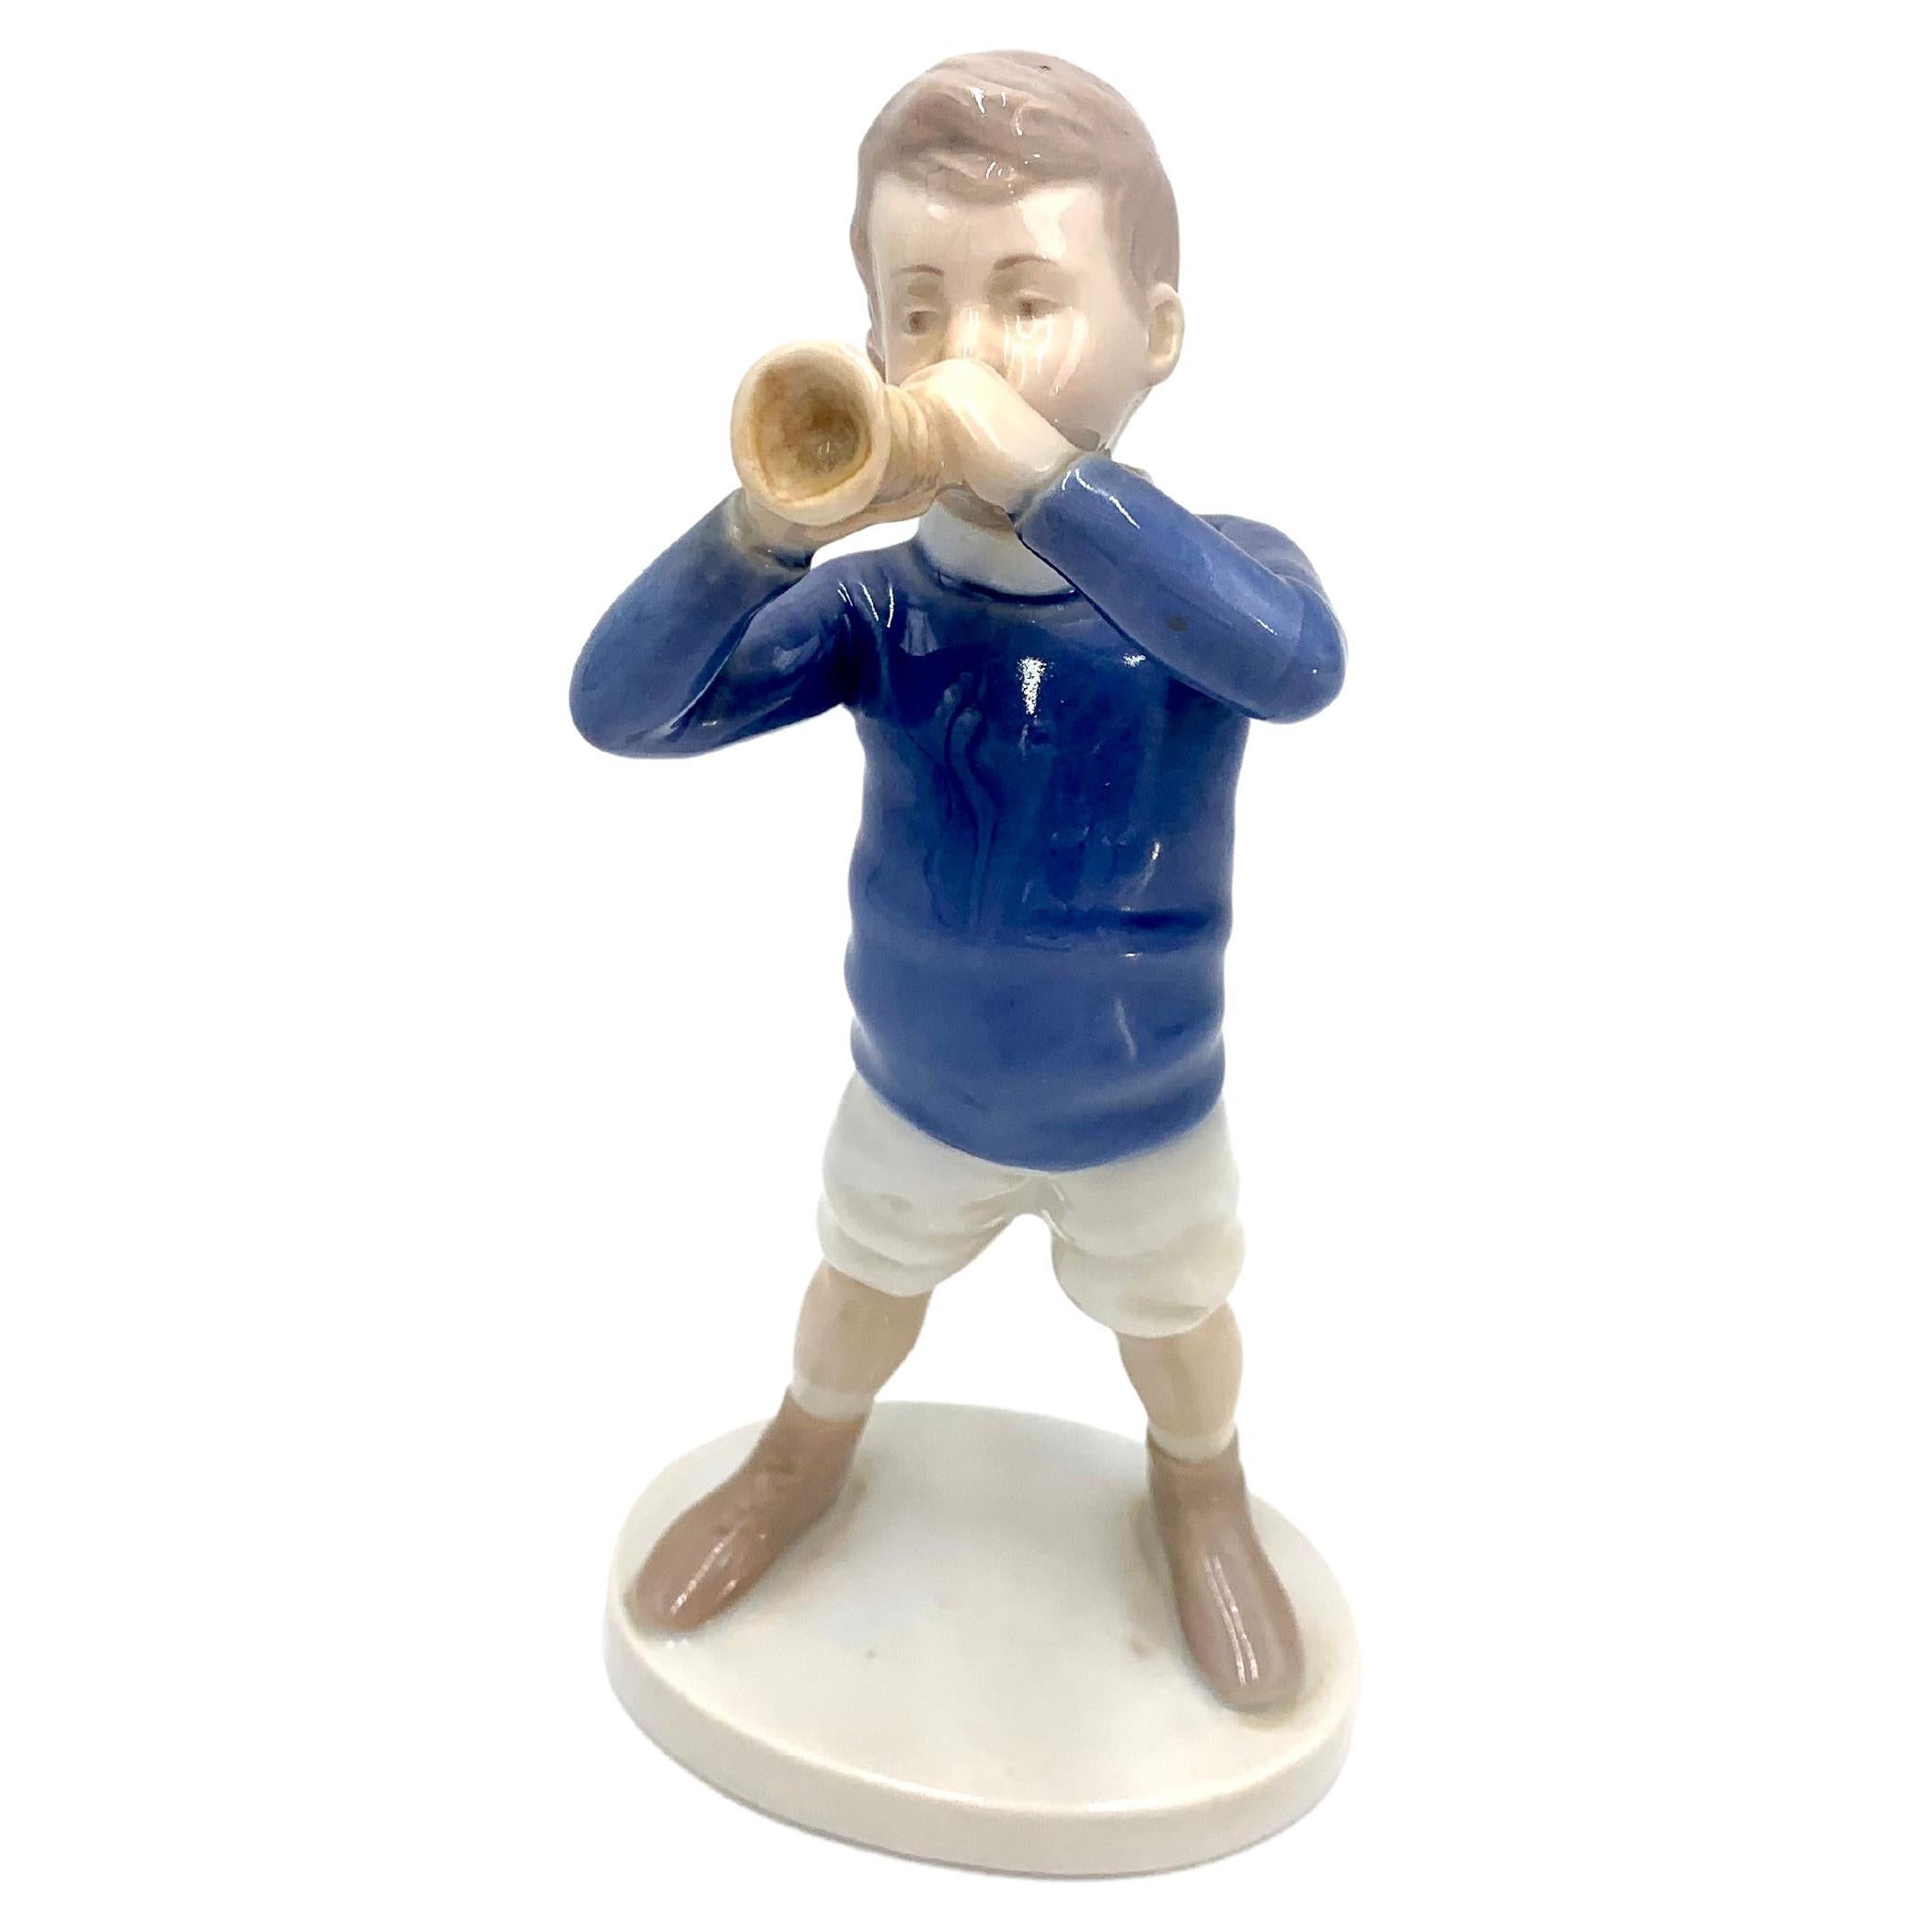 Porcelain Figurine of a Boy with a Trumpet, Bing & Grondahl, Denmark, 1970s/80s